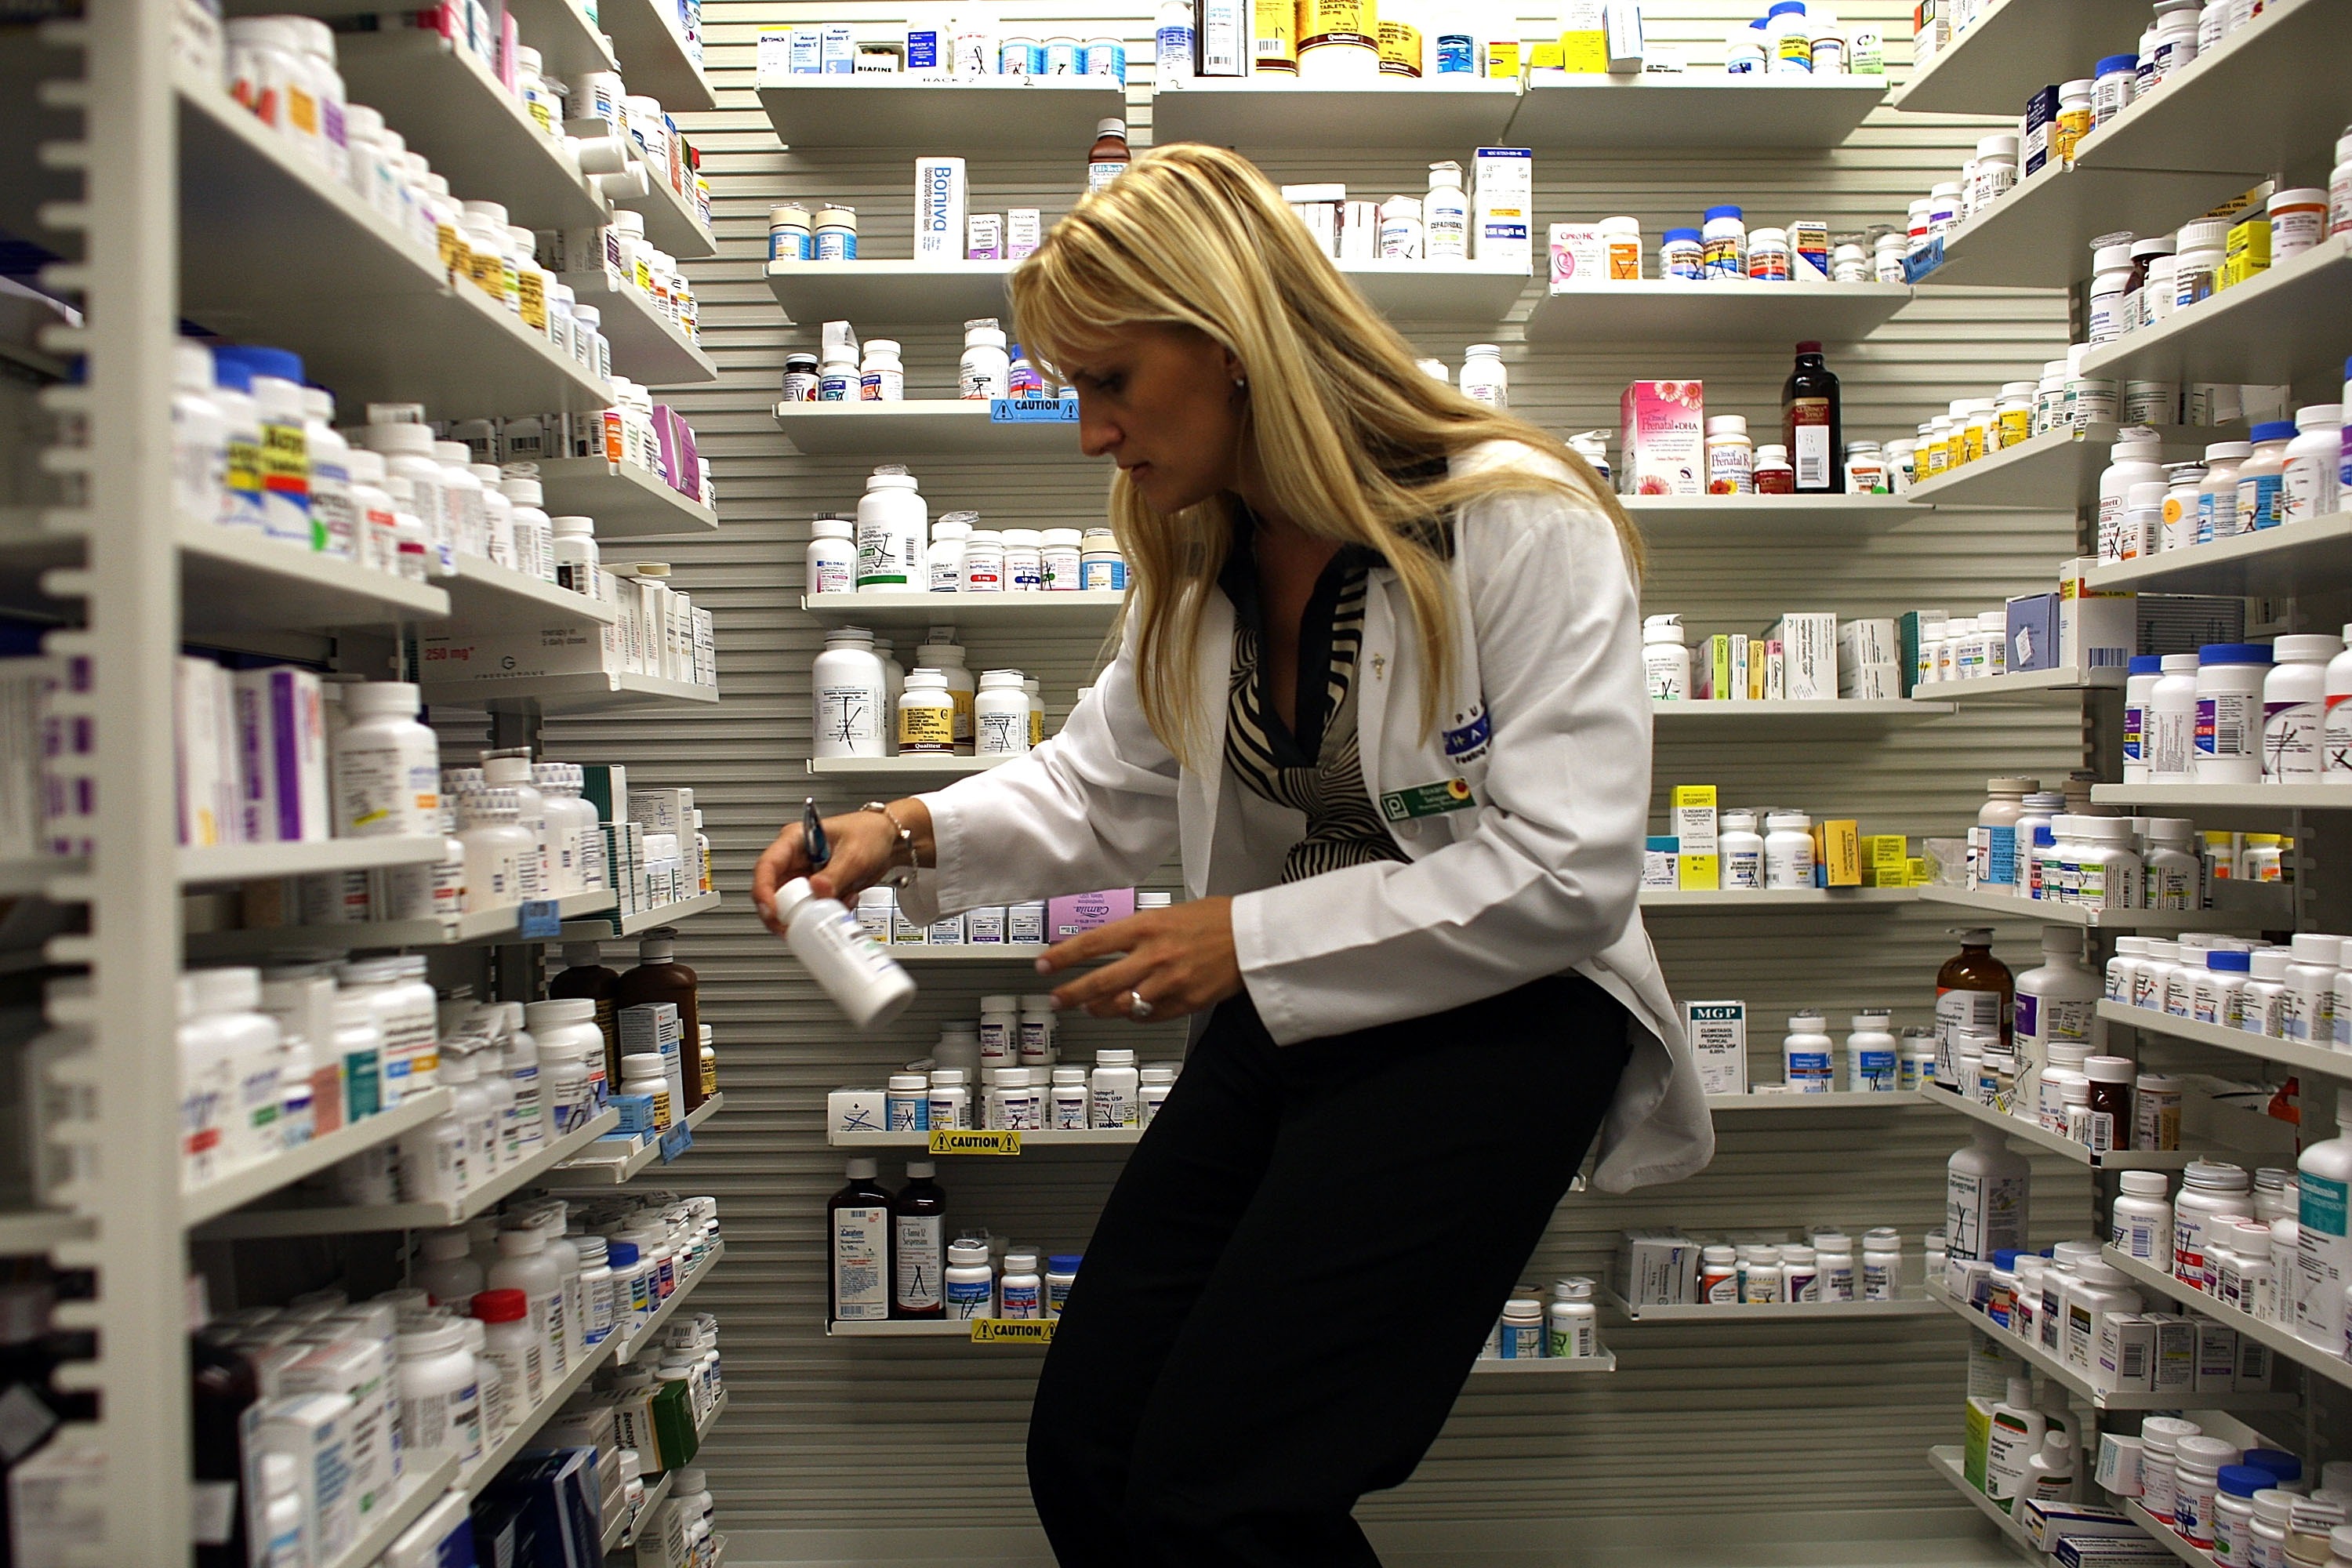 A pharmacist selects a bottle of medication from shelves and shelves of options.